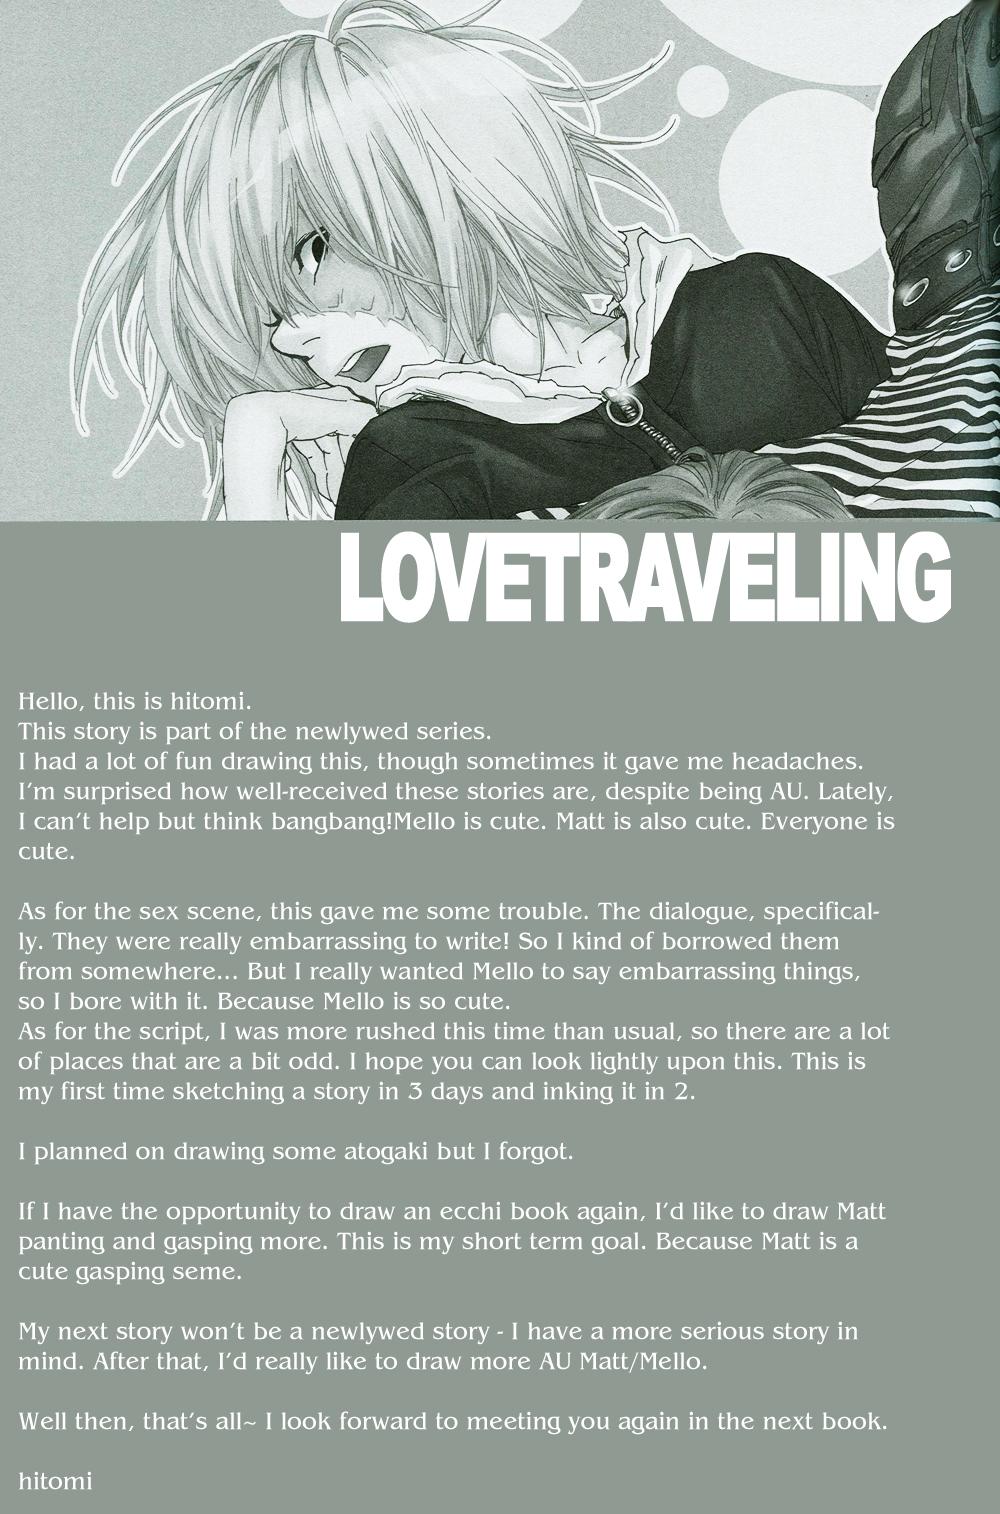 Death Note - Love Traveling 36